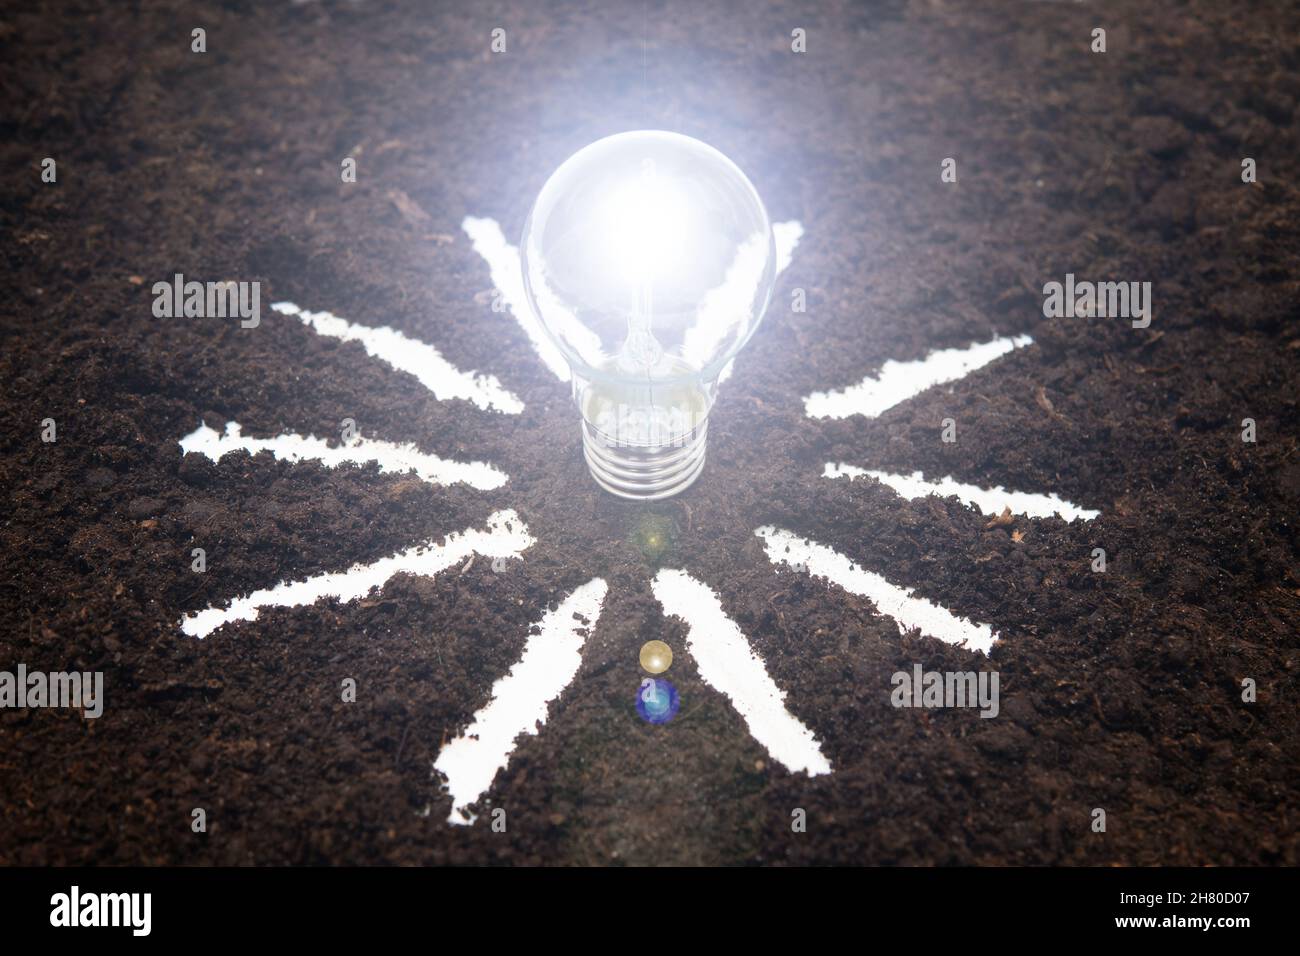 Glowing light bulb with a sun symbol on the soil. Solar power concept. Stock Photo